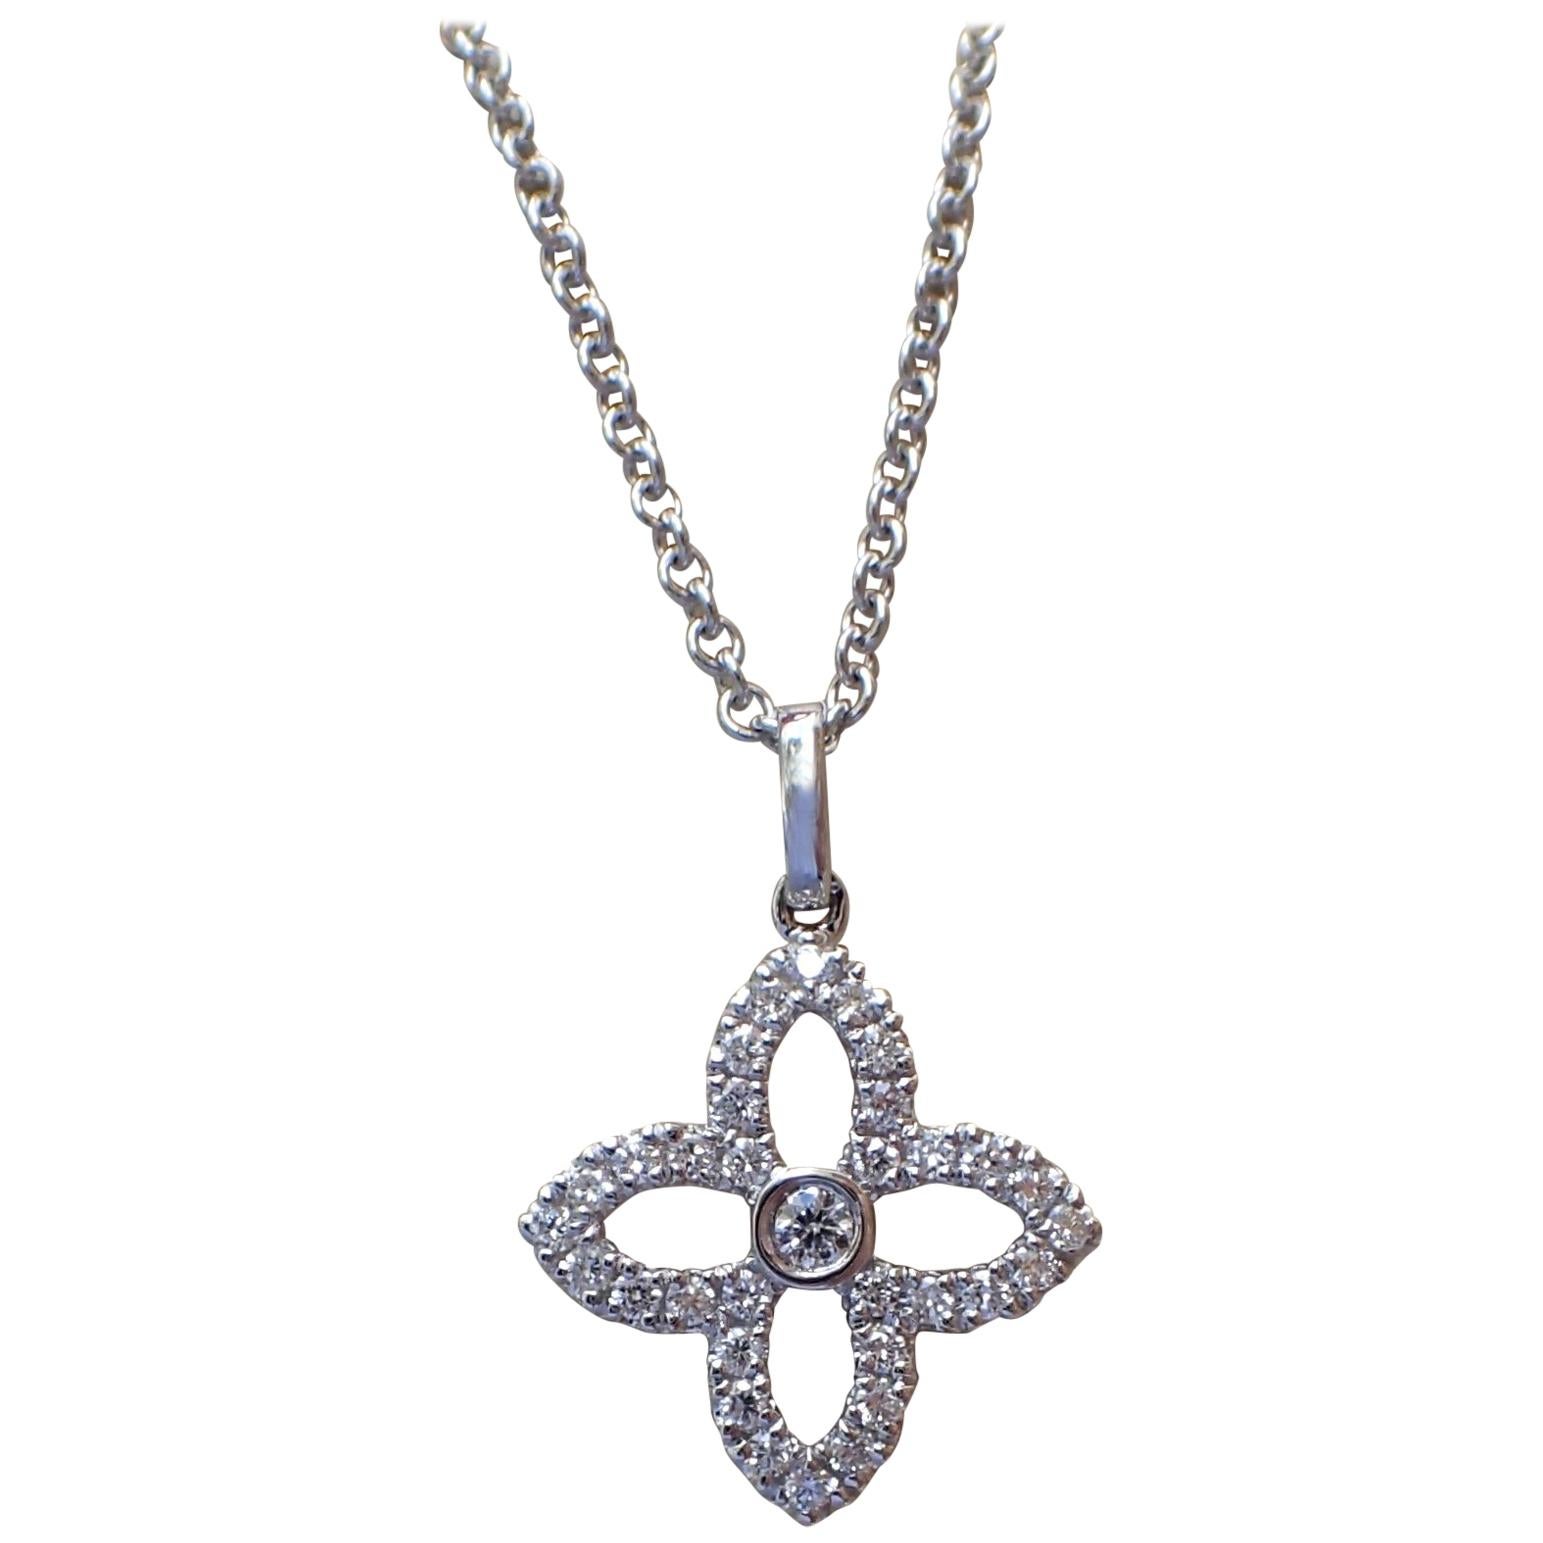 18 Karat Gold Flower Pendant with 0.19 Carat of Diamond Hangs from a Cable Chain For Sale 4